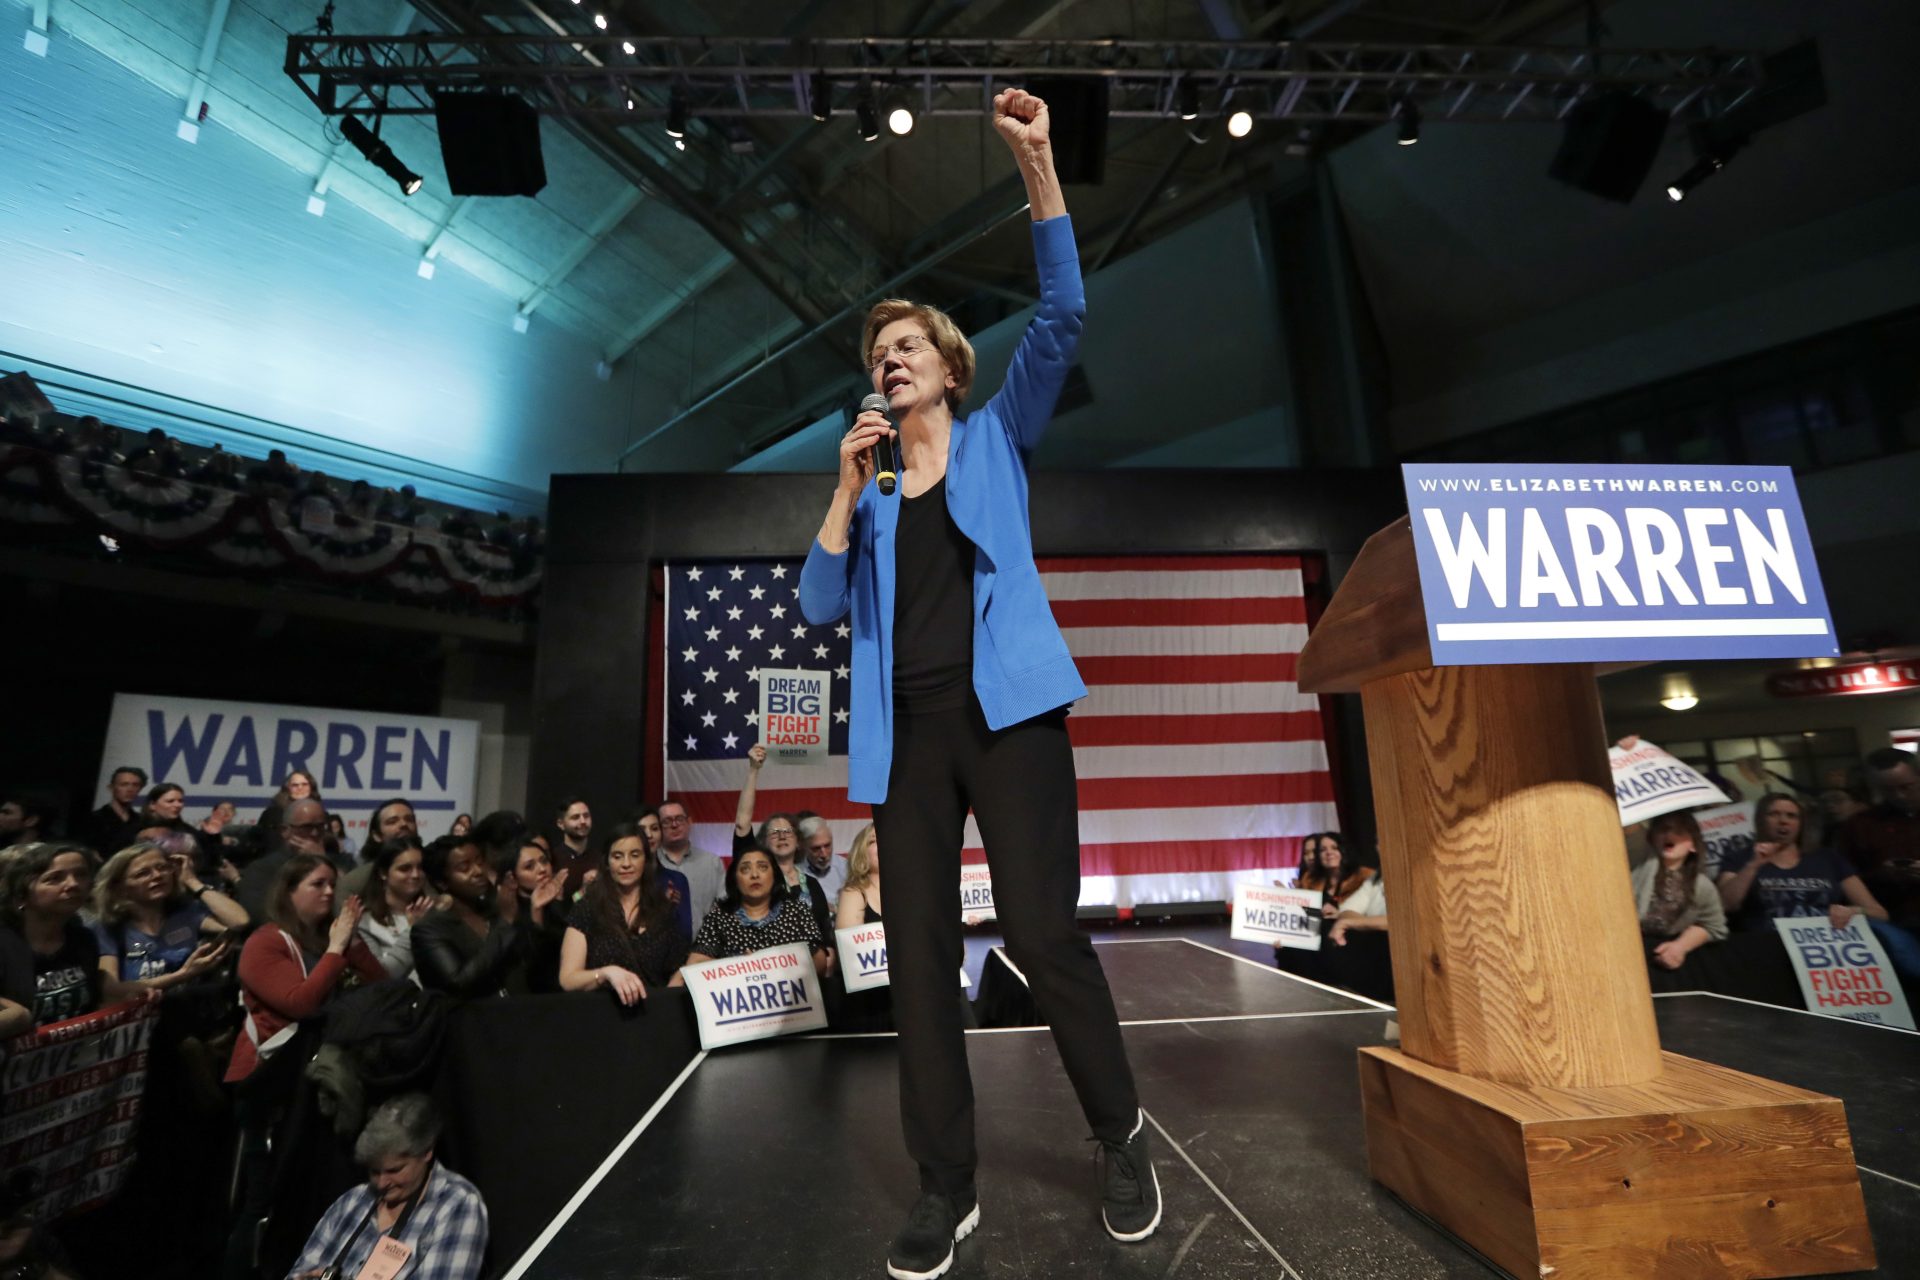 Sen. Elizabeth Warren makes a fist during a campaign event in Seattle, Wash. Washington state holds its nominating contest March 10, a week after Super Tuesday.